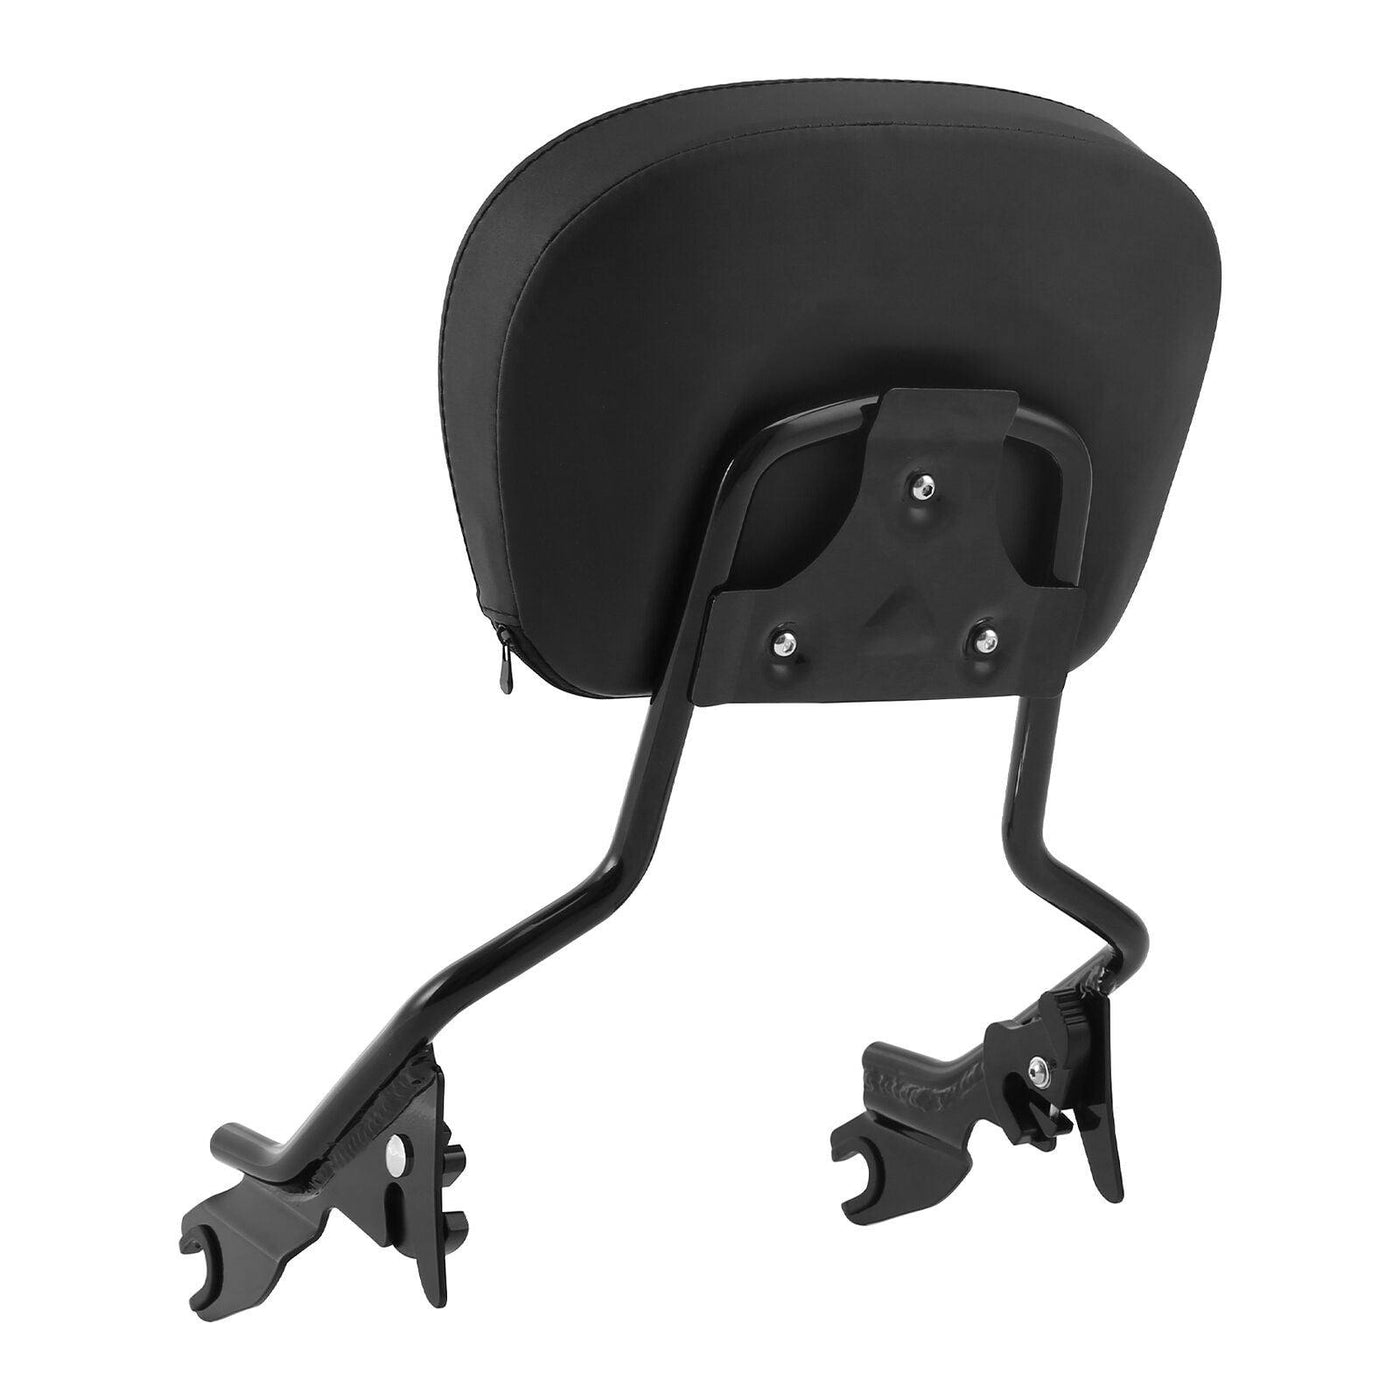 Detachable Passenger Backrest Sissy Bar Fit For Harley Touring Road King 2009-Up - Moto Life Products